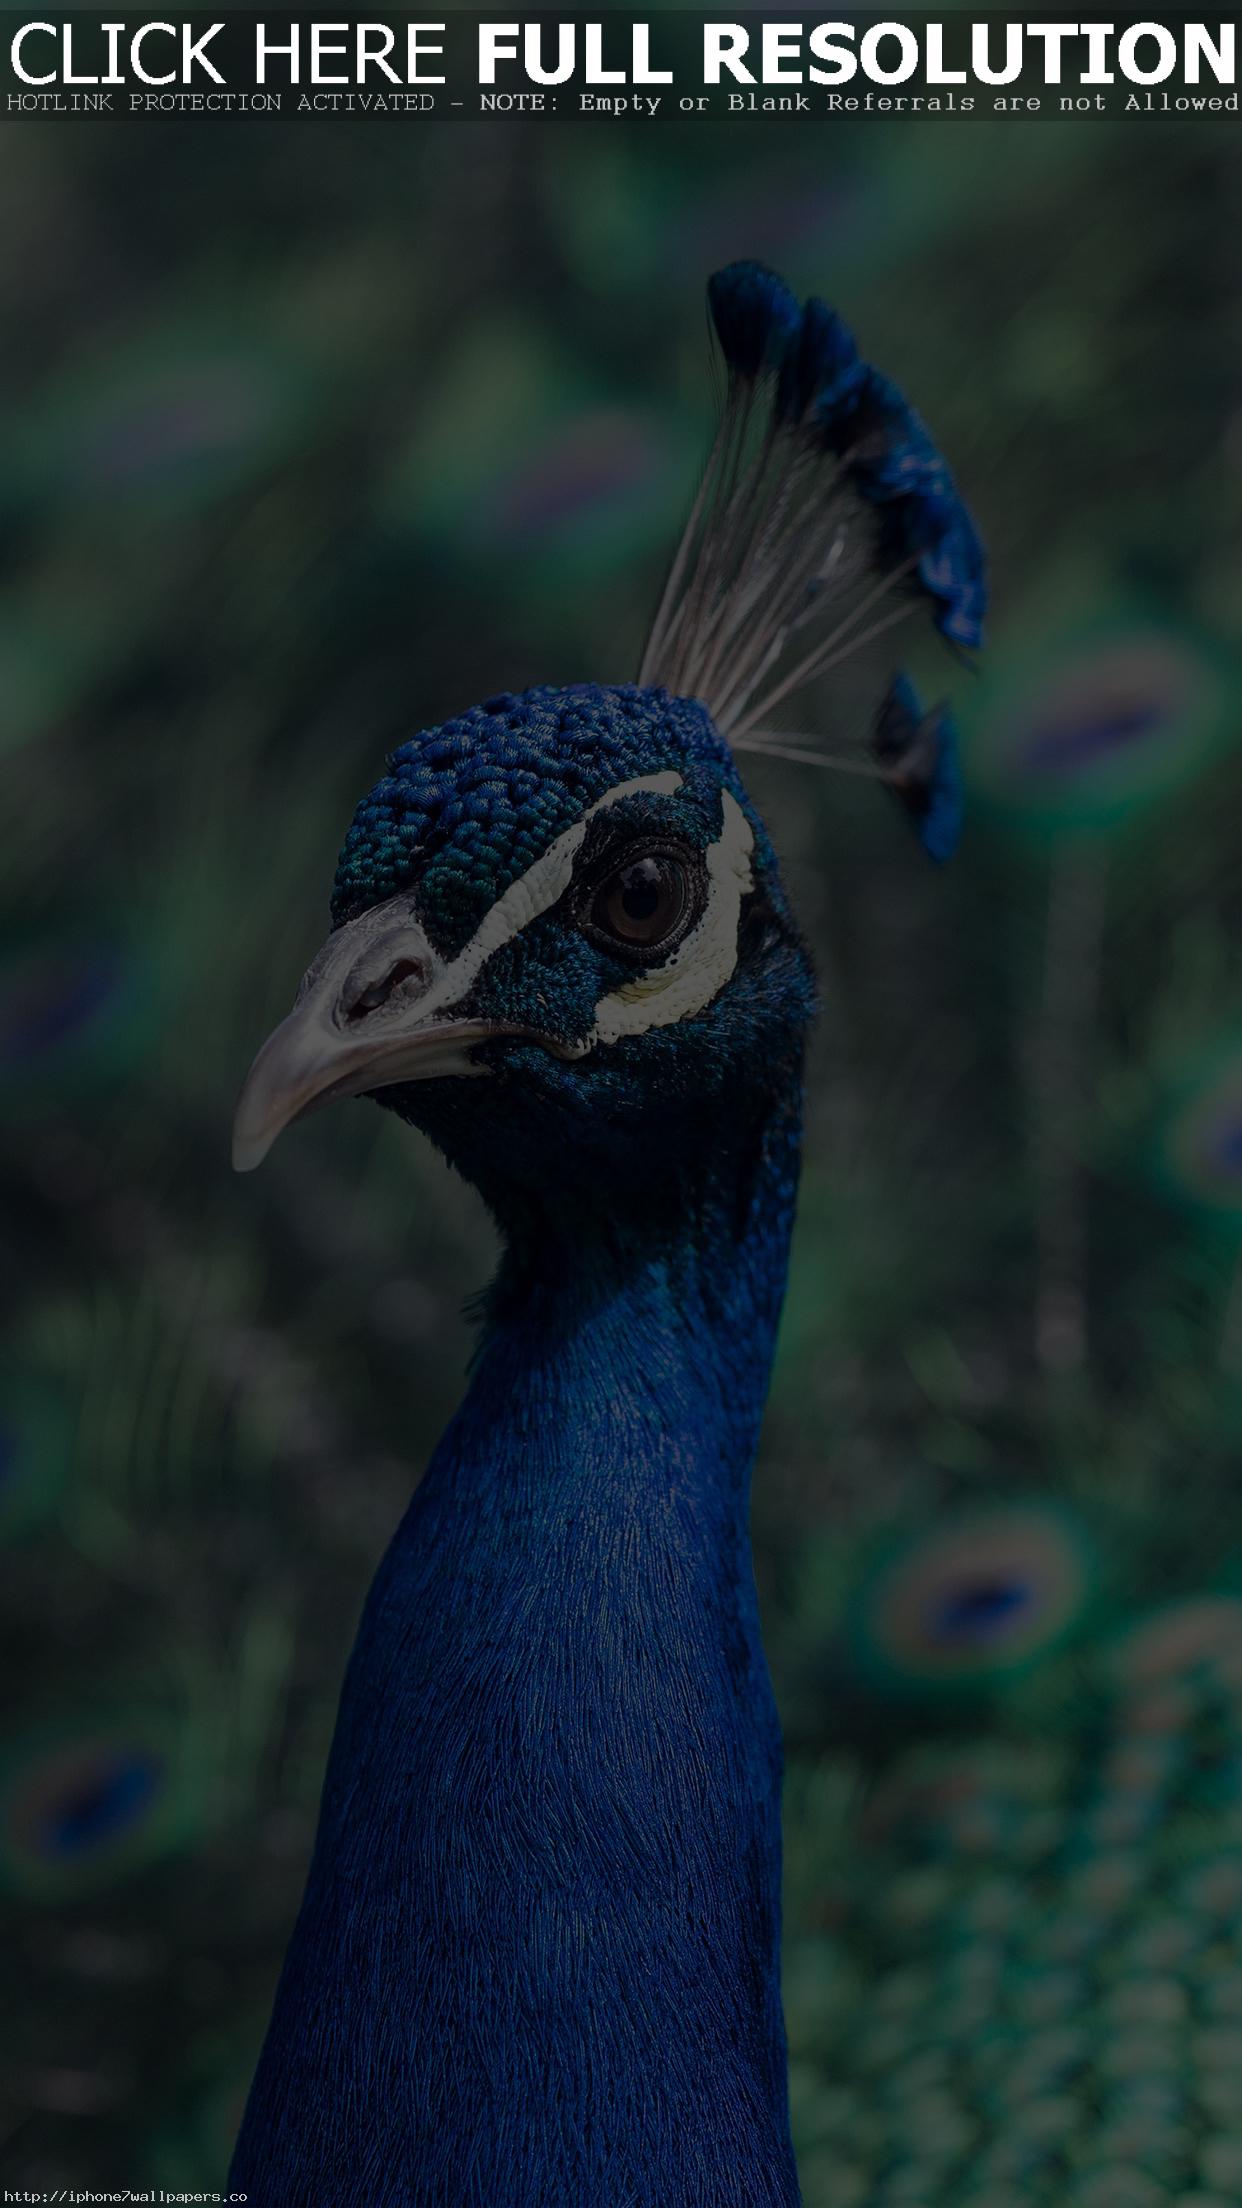 Peacock Wallpaper For Android - Warren Street Tube Station , HD Wallpaper & Backgrounds